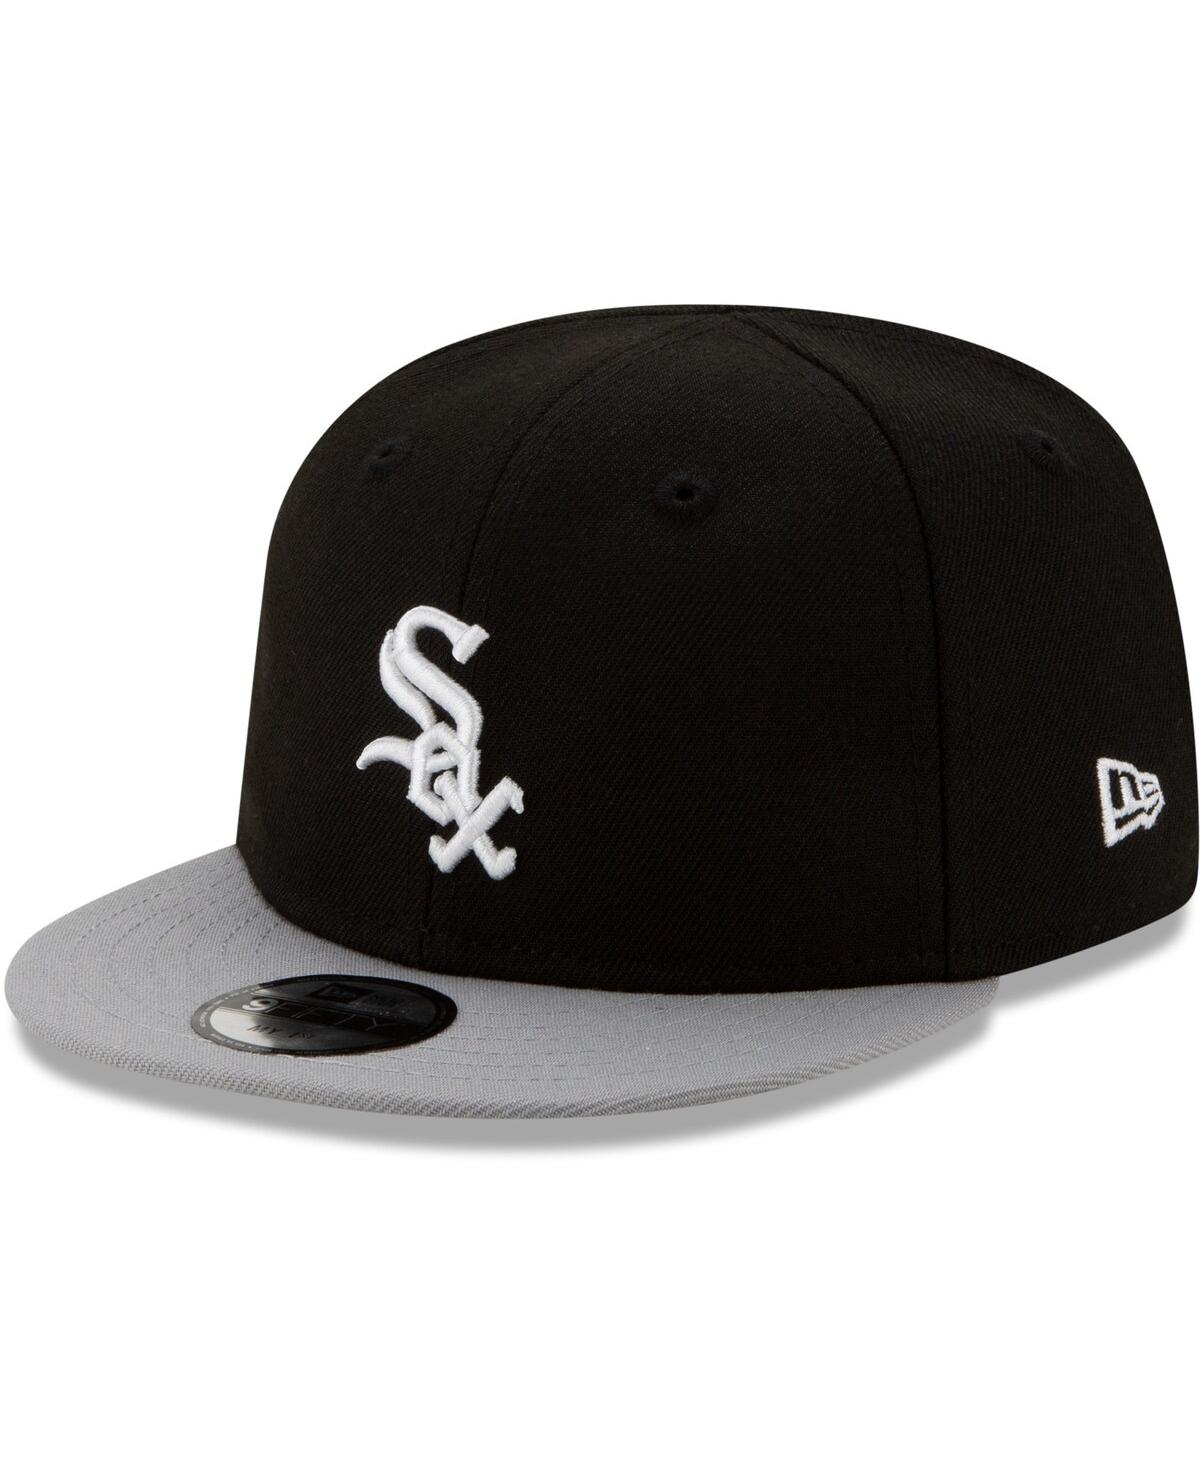 New Era Babies' Infant Unisex  Black Chicago White Sox My First 9fifty Hat